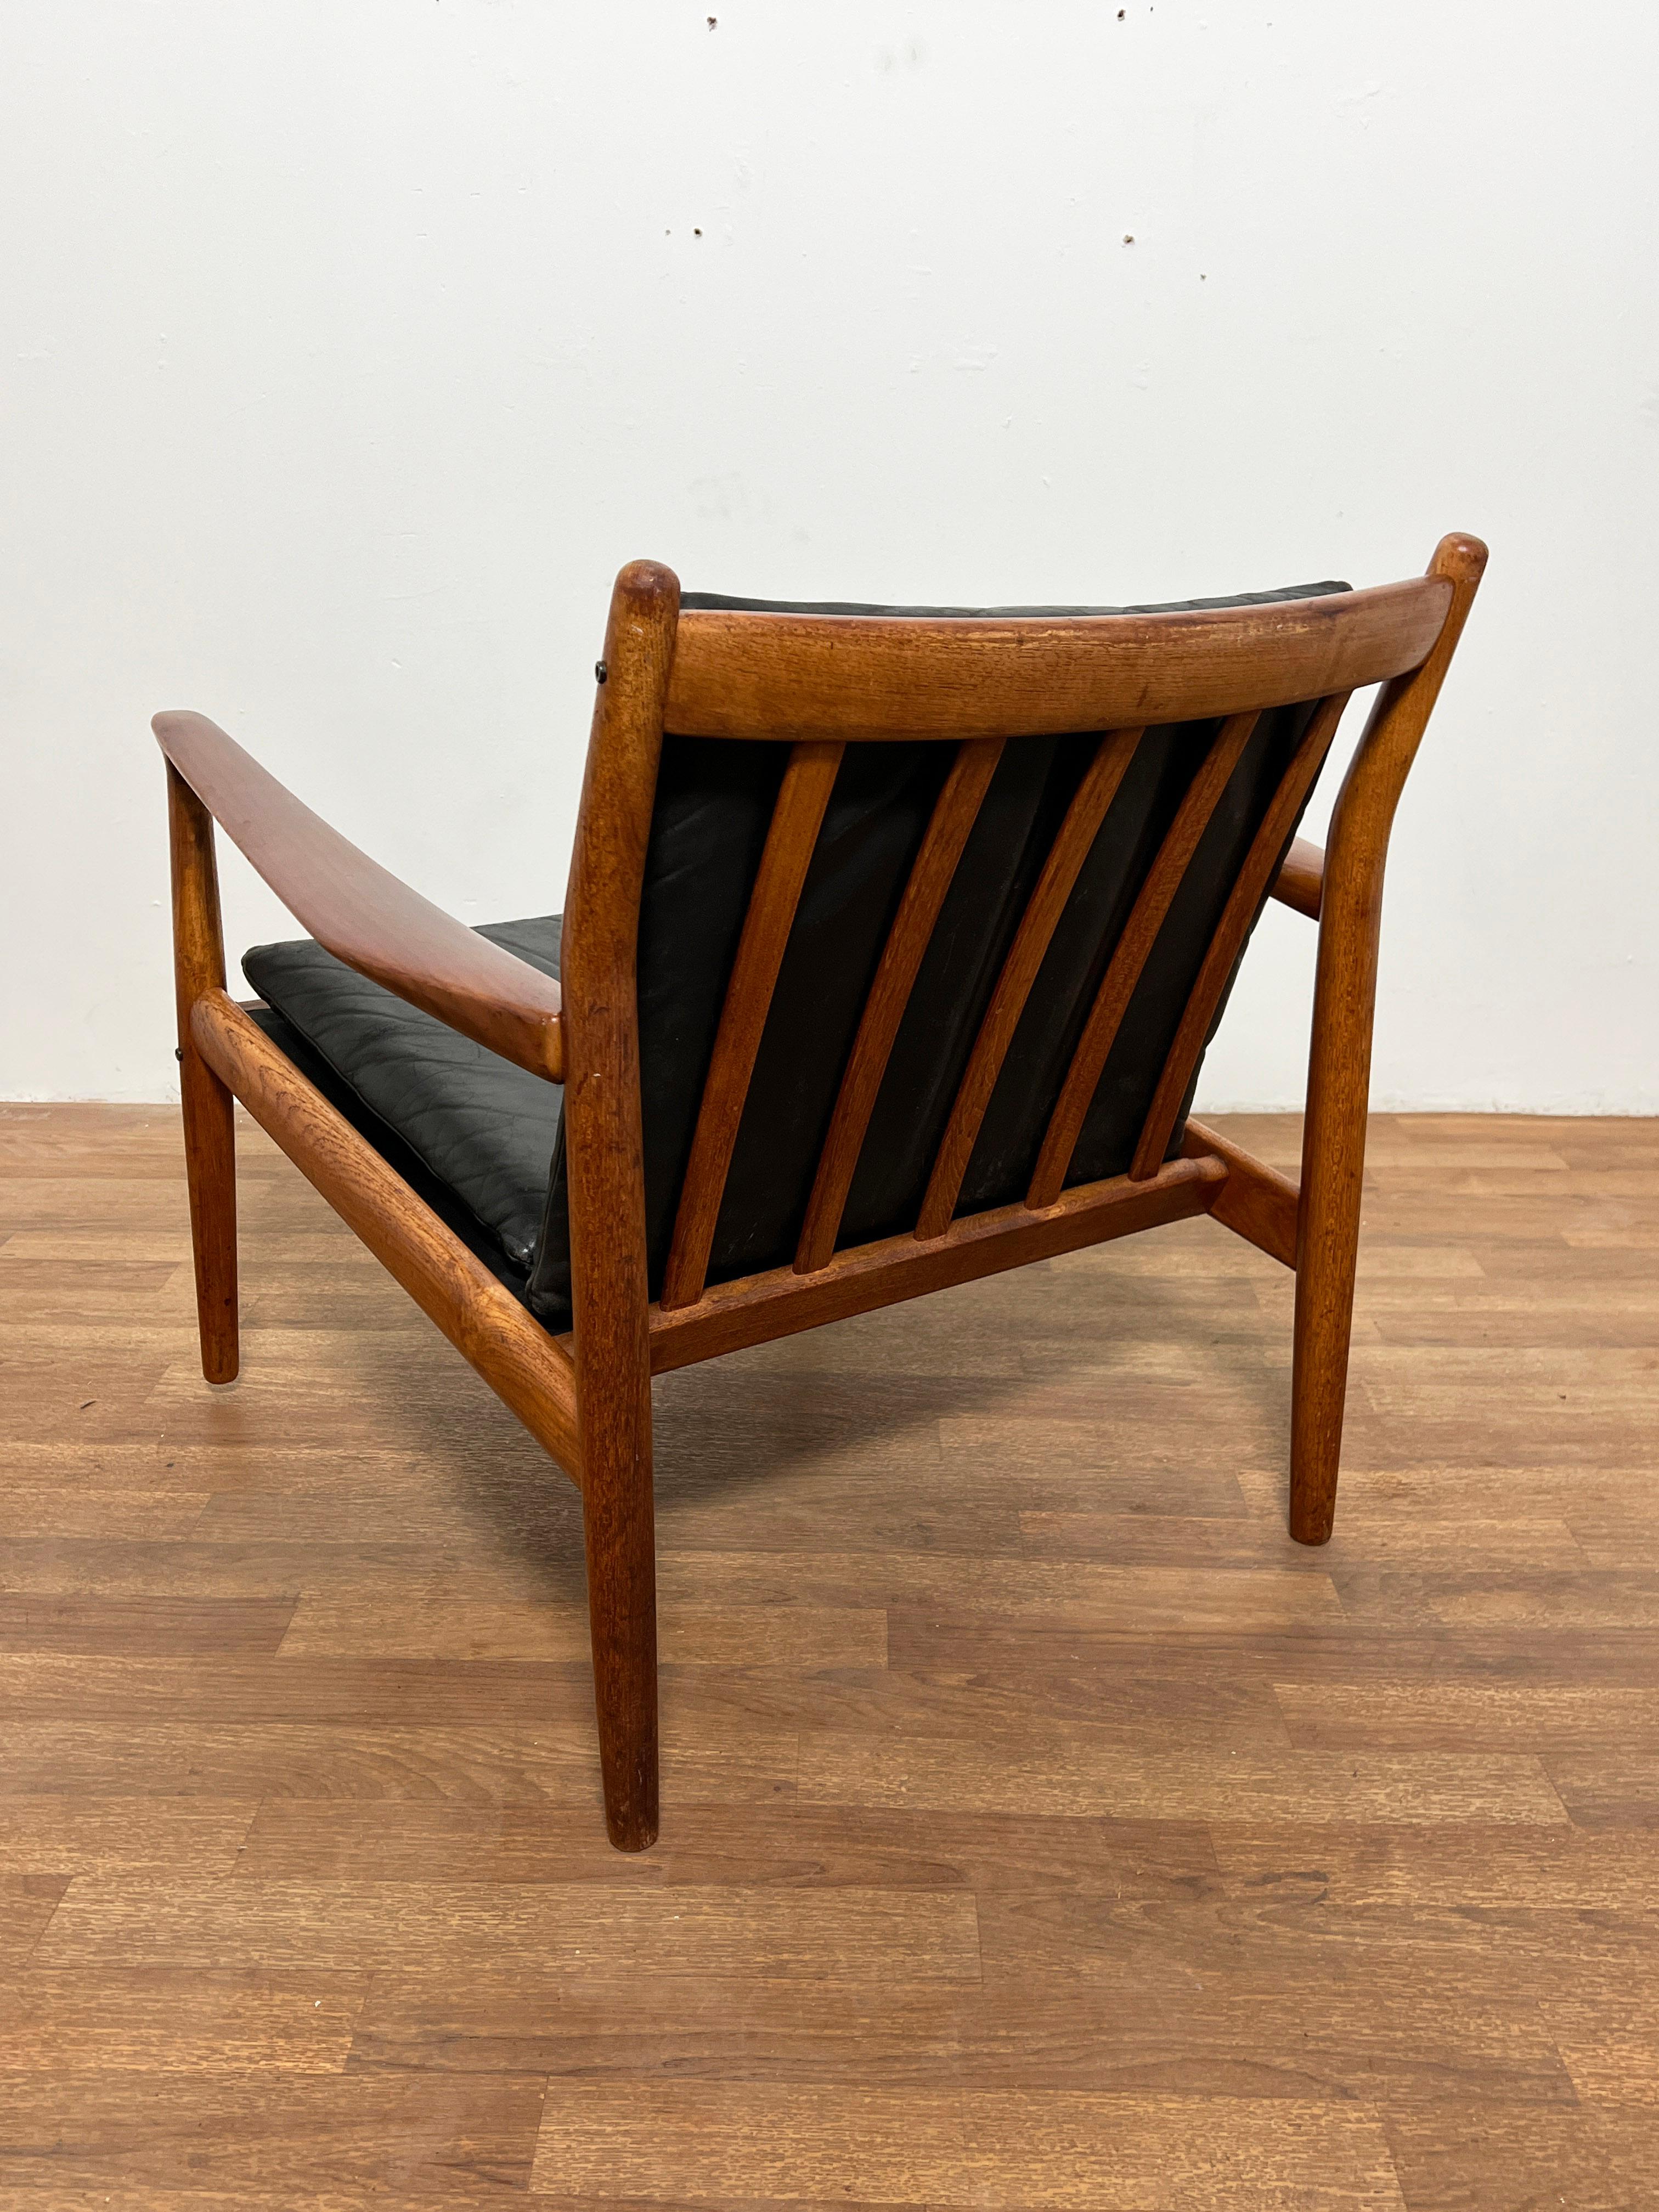 Scandinavian Modern Svend Aage Eriksen for Glostrup Danish Teak and Leather Lounge Chair Circa 1960s For Sale